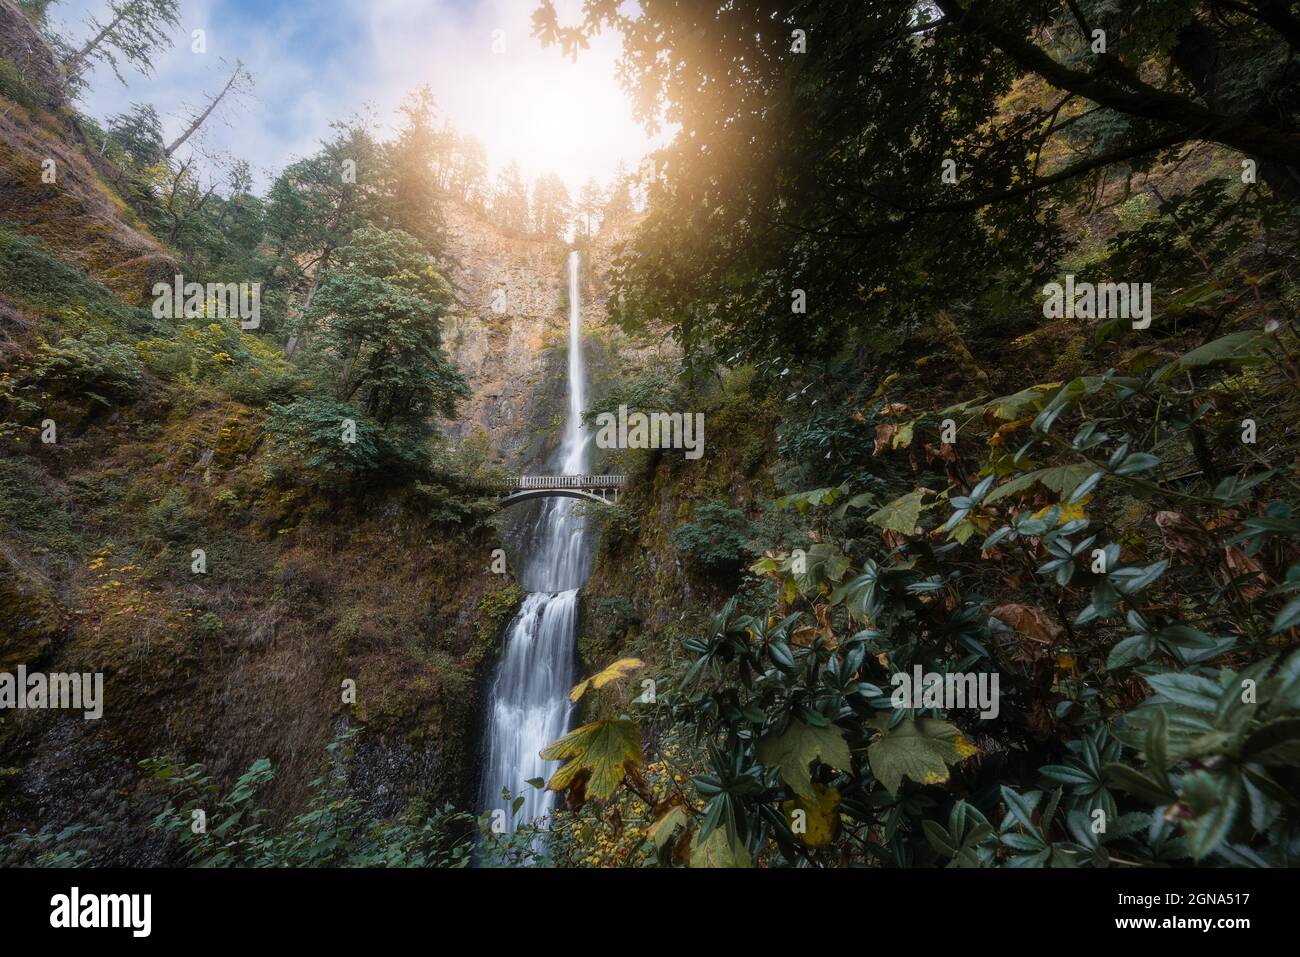 Magnificent and beautiful Multnomah Falls waterfall tourist travel destination in the lush forest of Oregon's Columbia River Gorge Stock Photo